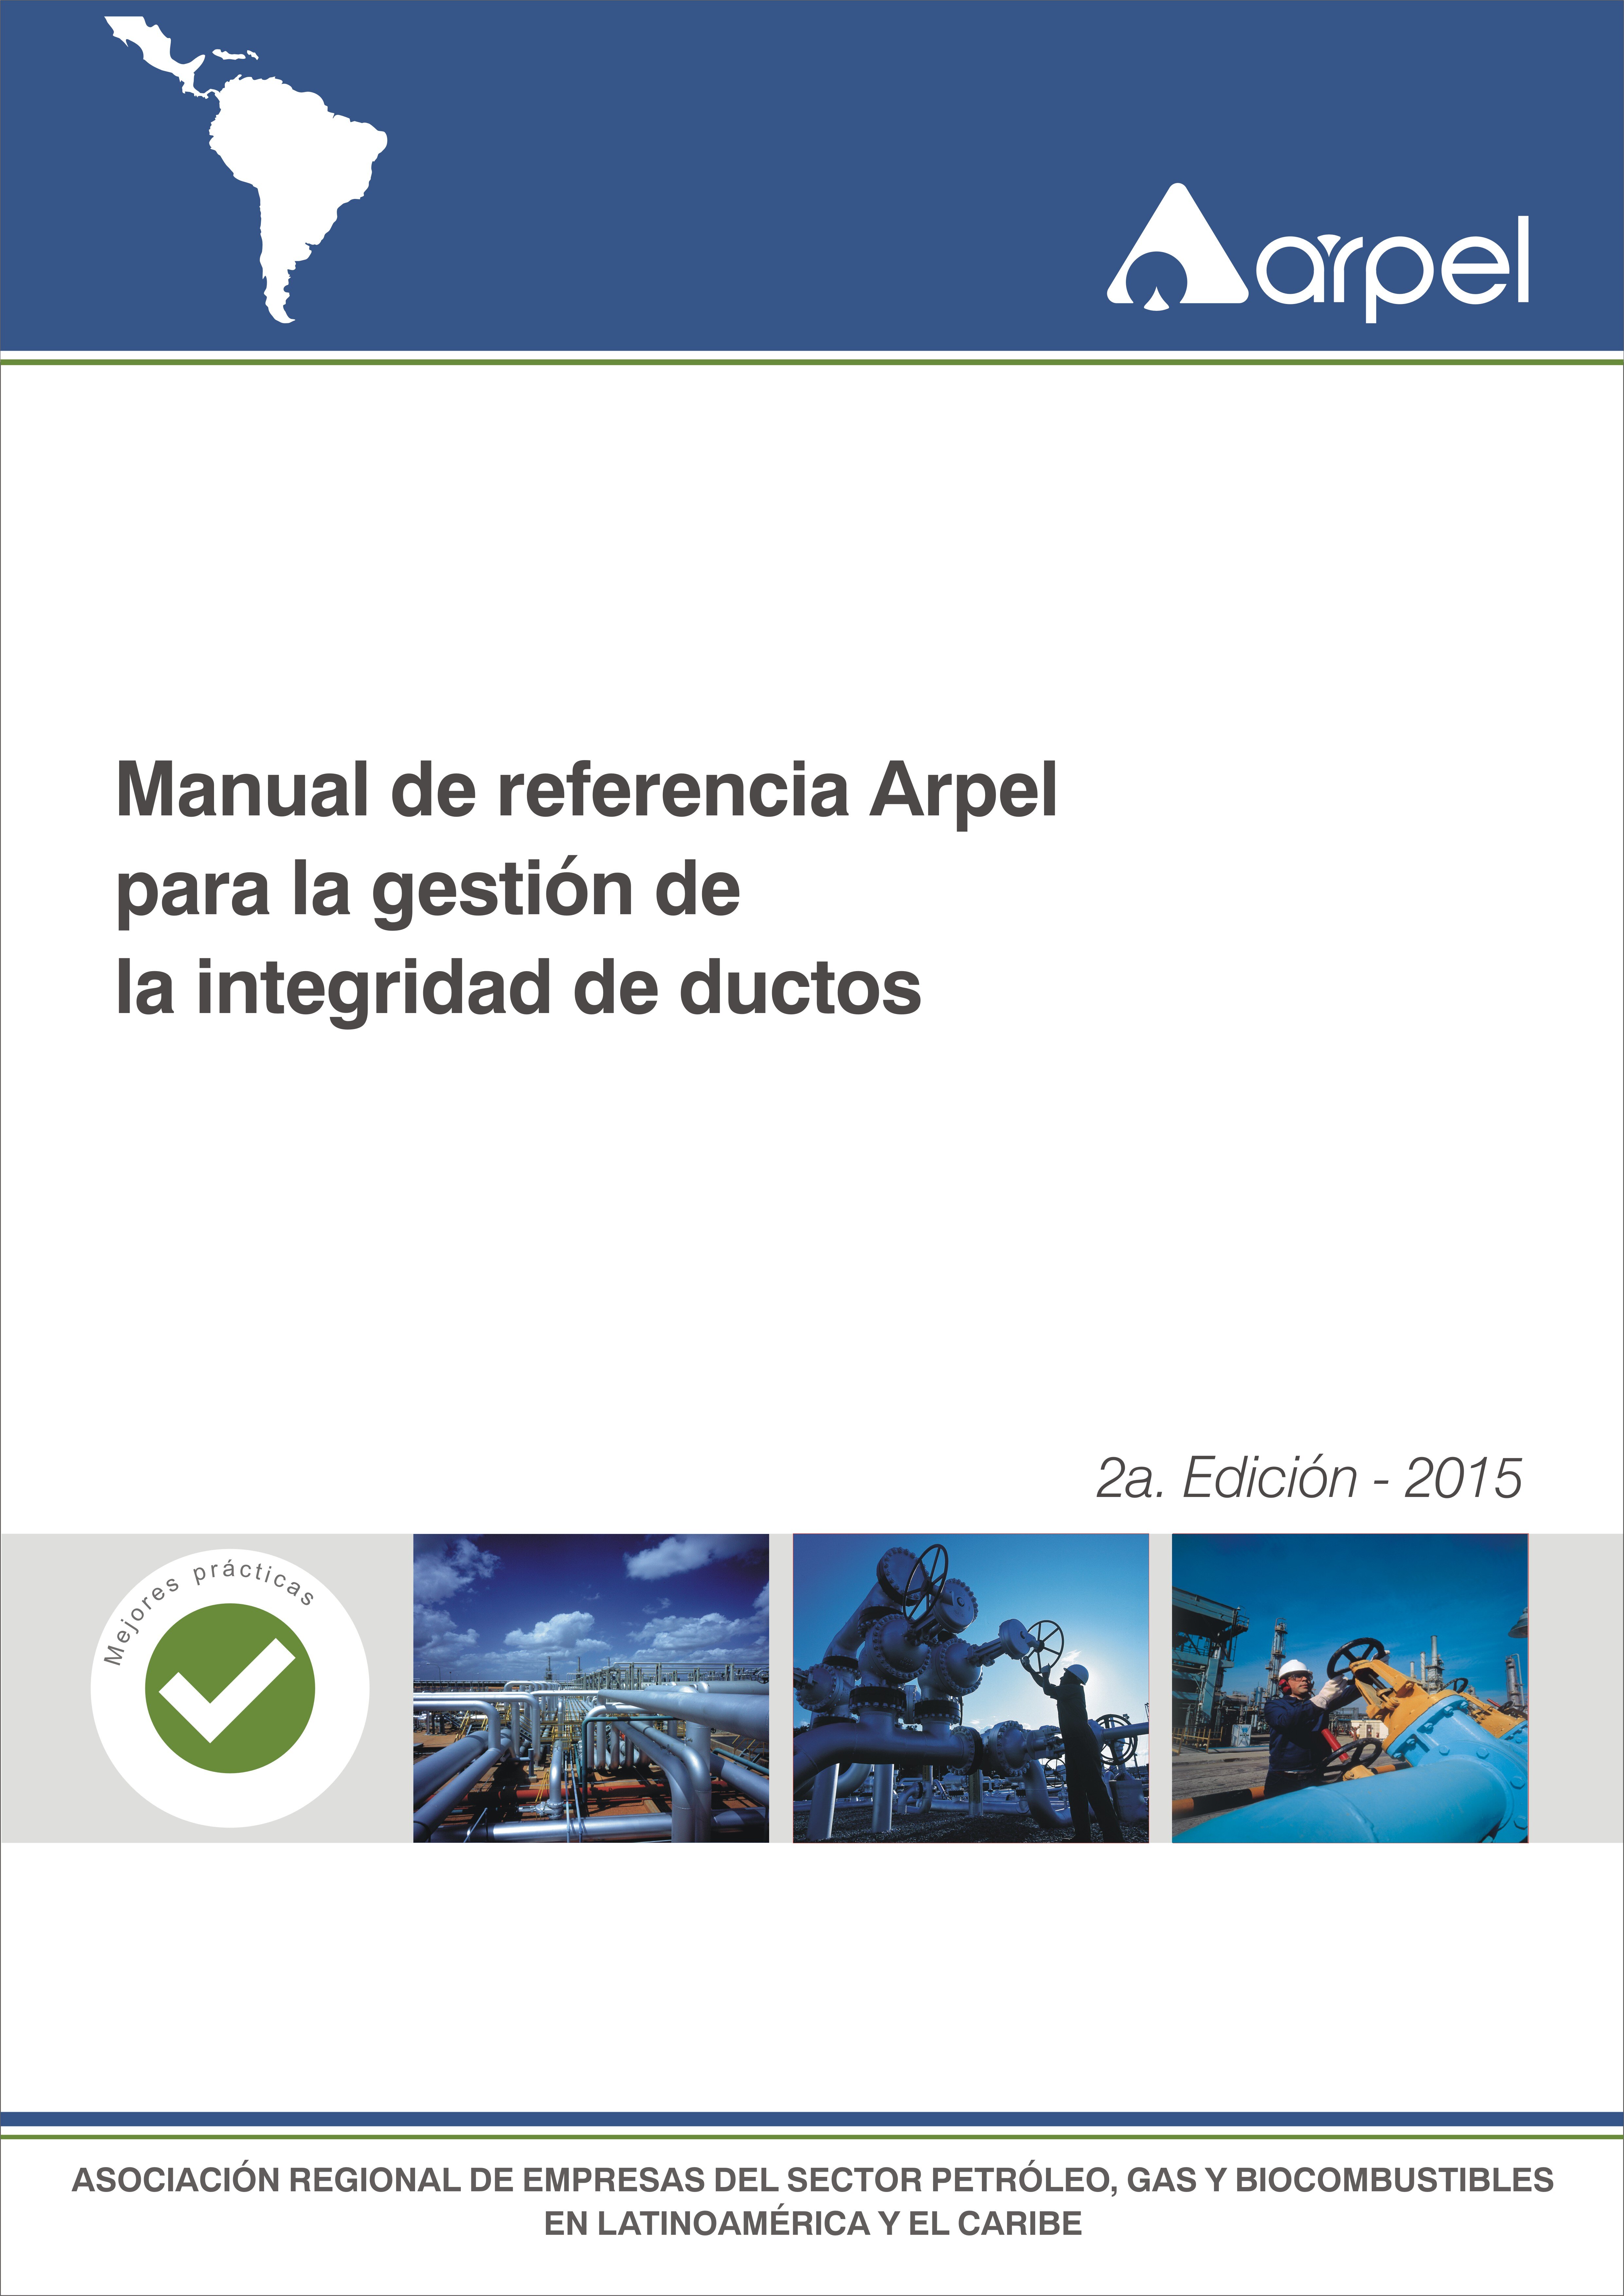 ARPEL Reference Manual for Pipeline integrity Management (2nd ed. 2015)